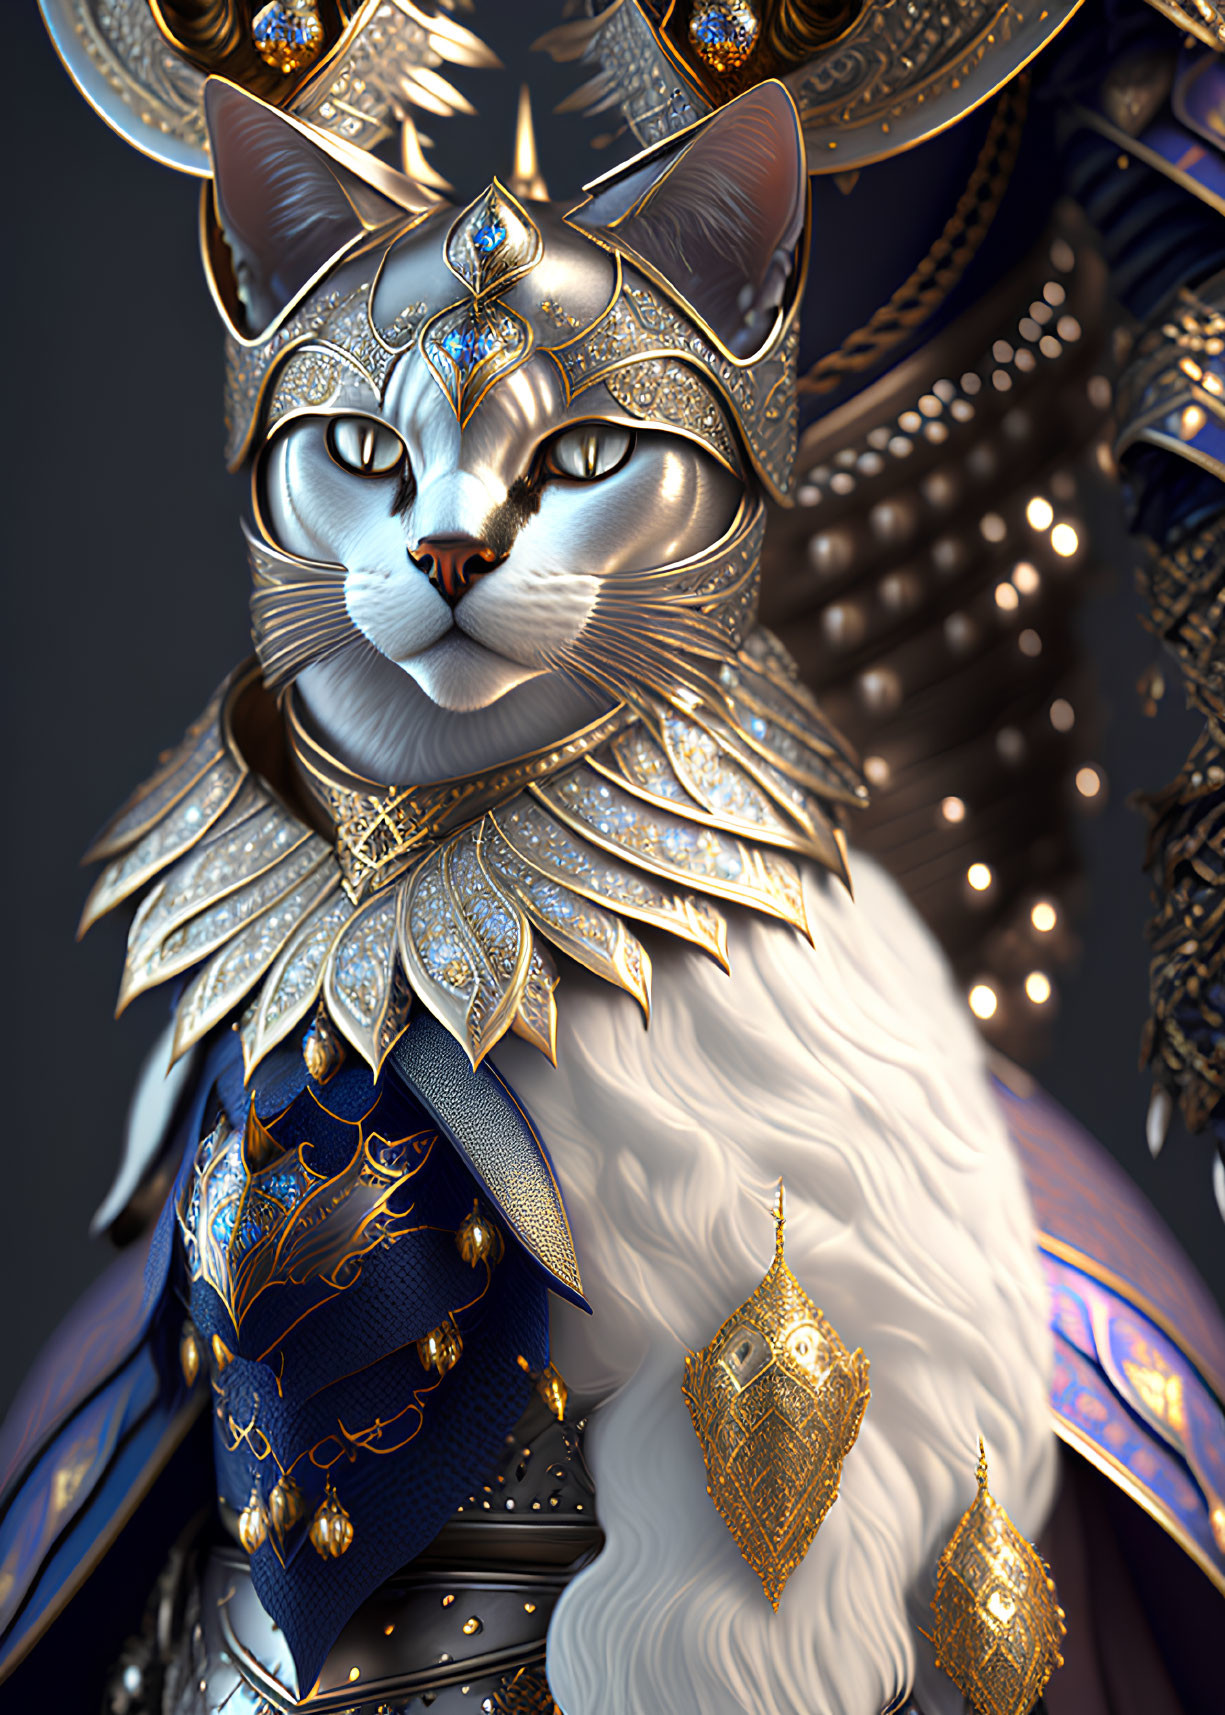 Majestic cat in golden armor and jewelry exudes regal elegance